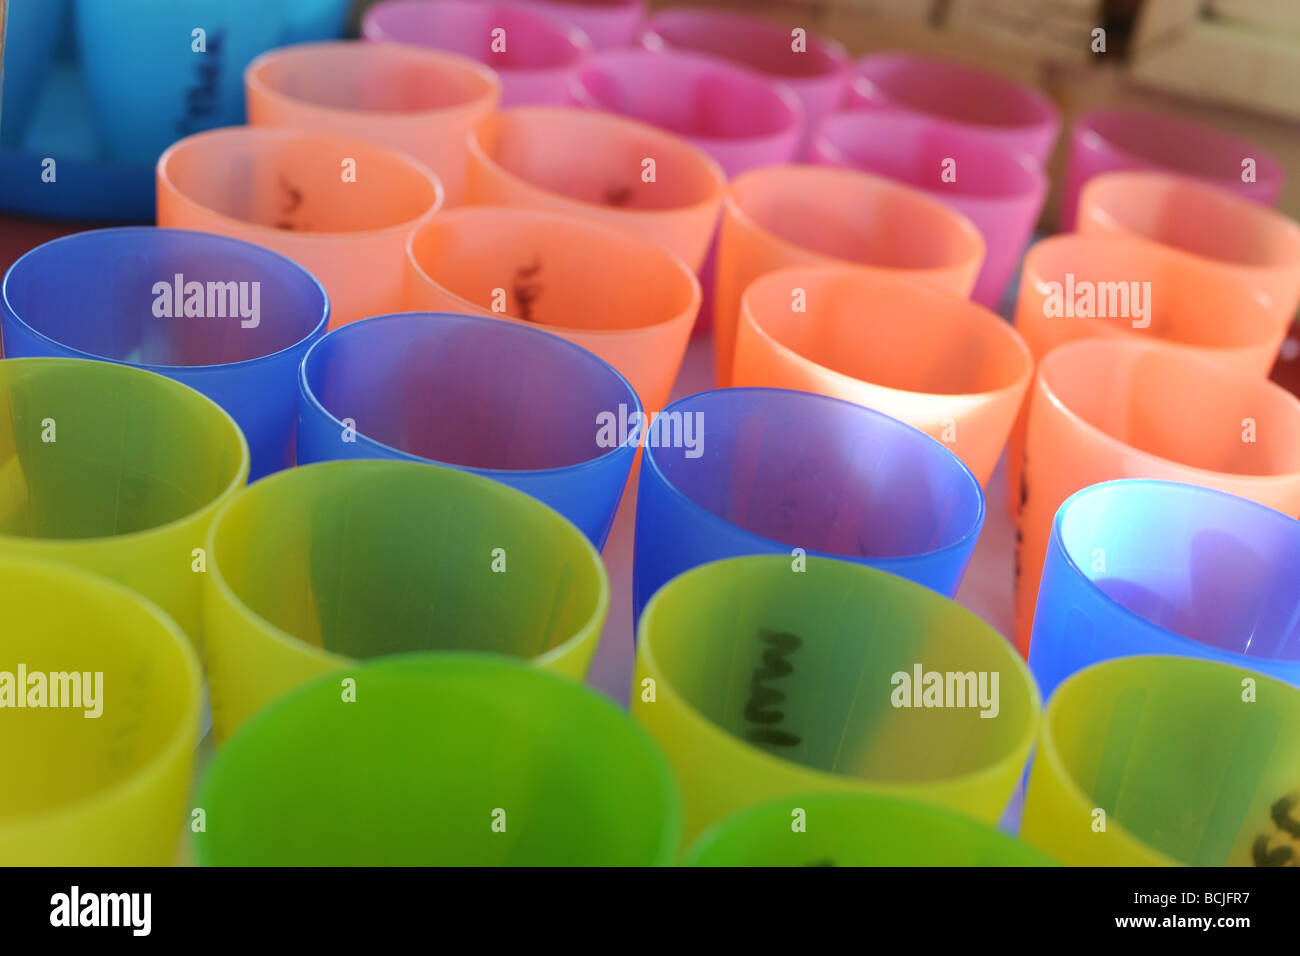 rows of plastic drinking cups Stock Photo